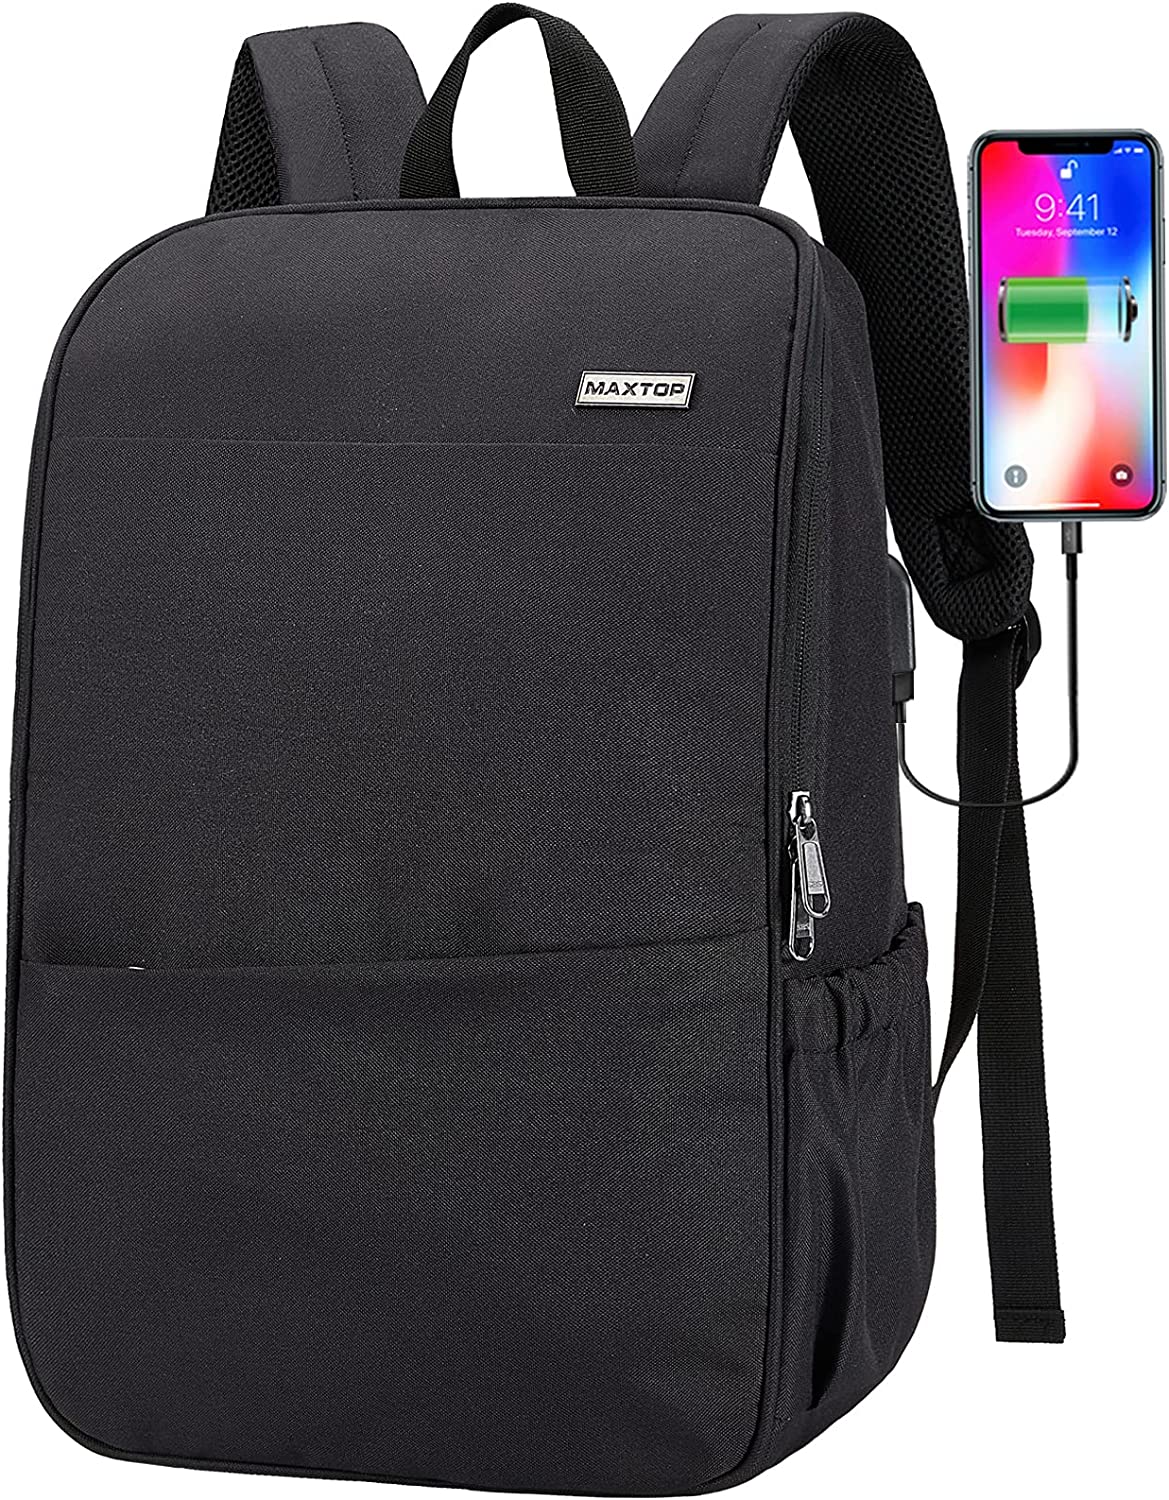 MAXTOP Deep Storage Laptop Backpack with USB Charging [...]